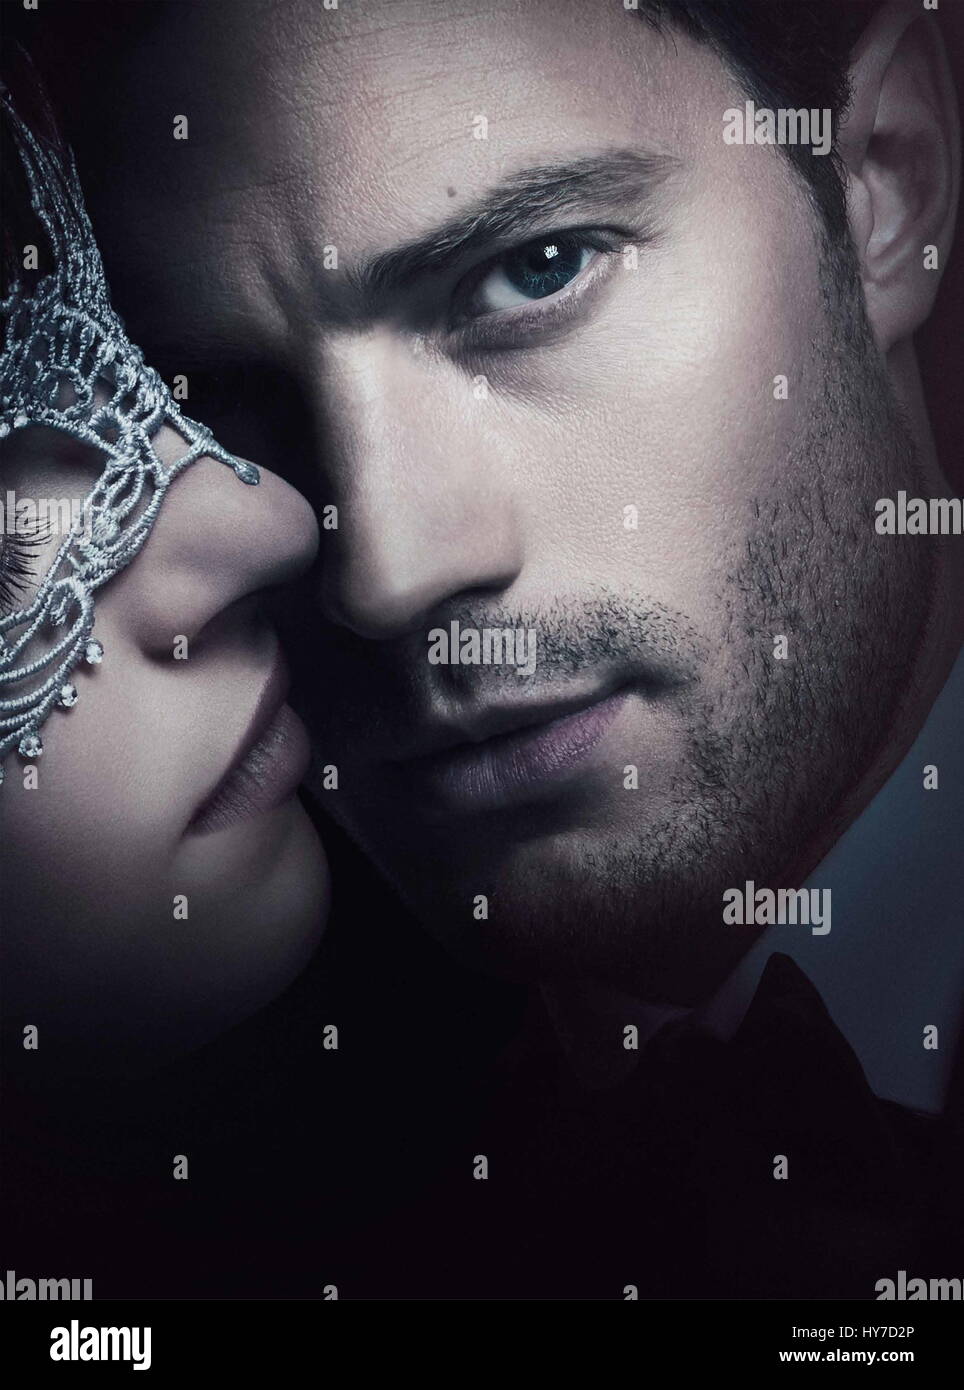 RELEASE DATE: February 10, 2017 TITLE: Fifty Shades Darker STUDIO: Universal Pictures DIRECTOR: James Foley PLOT: While Christian wrestles with his inner demons, Anastasia must confront the anger and envy of the women who came before her STARRING: Dakota Johnson as Anastasia Steele, Jamie Dornan as Christian Grey Poster Art (Credit: © Universal Pictures/Entertainment Pictures) Stock Photo